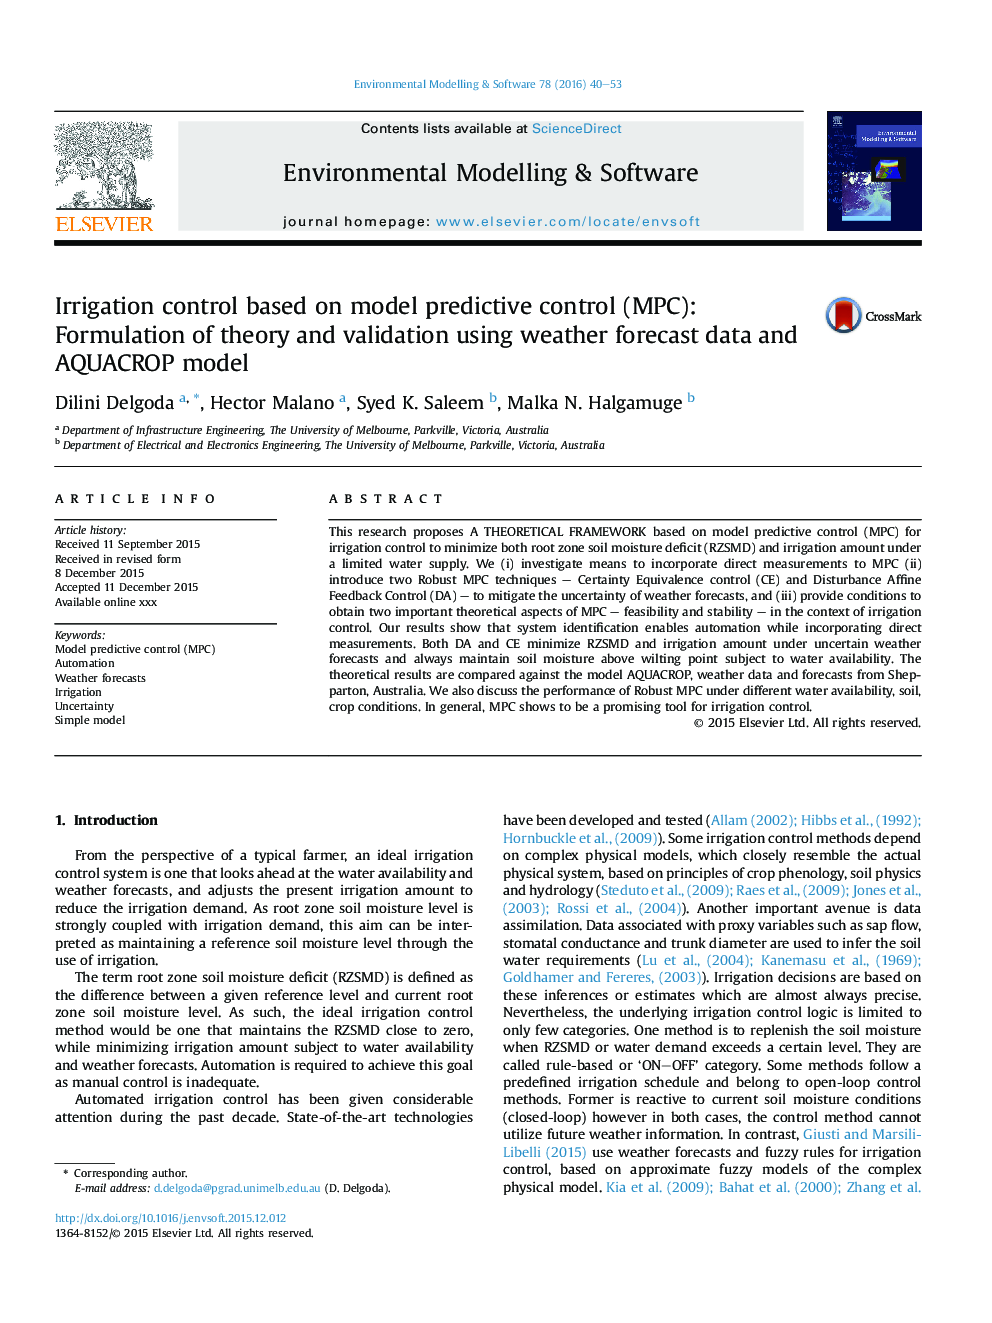 Irrigation control based on model predictive control (MPC): Formulation of theory and validation using weather forecast data and AQUACROP model